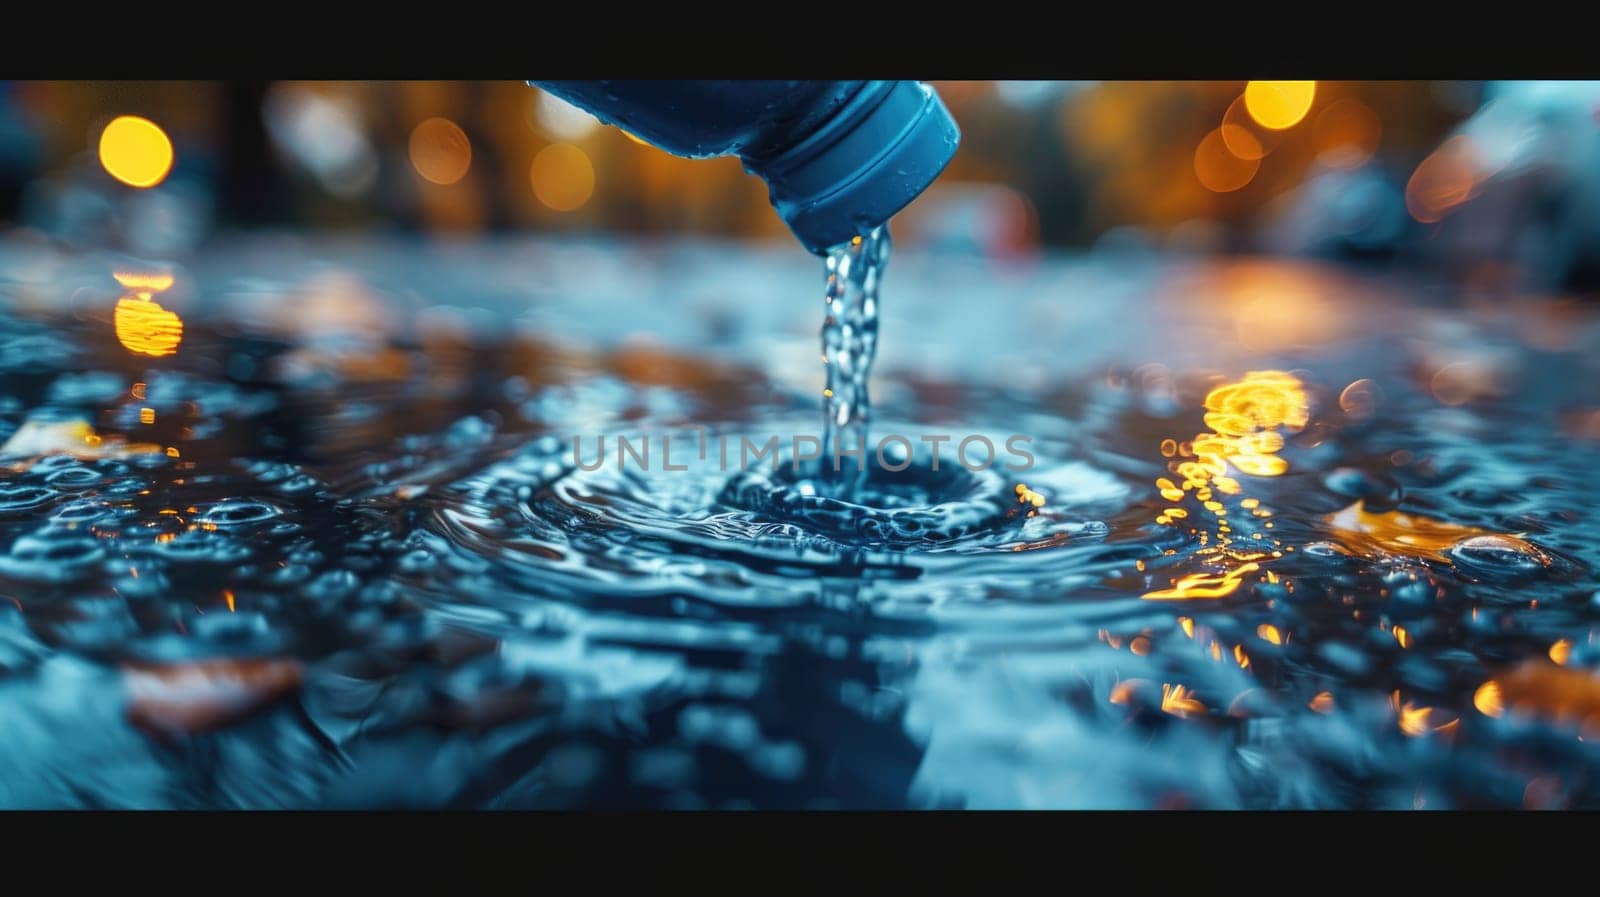 Close-up of a hand pouring oil into water, with a blurred background of warm bokeh lights. The concept of pollution.